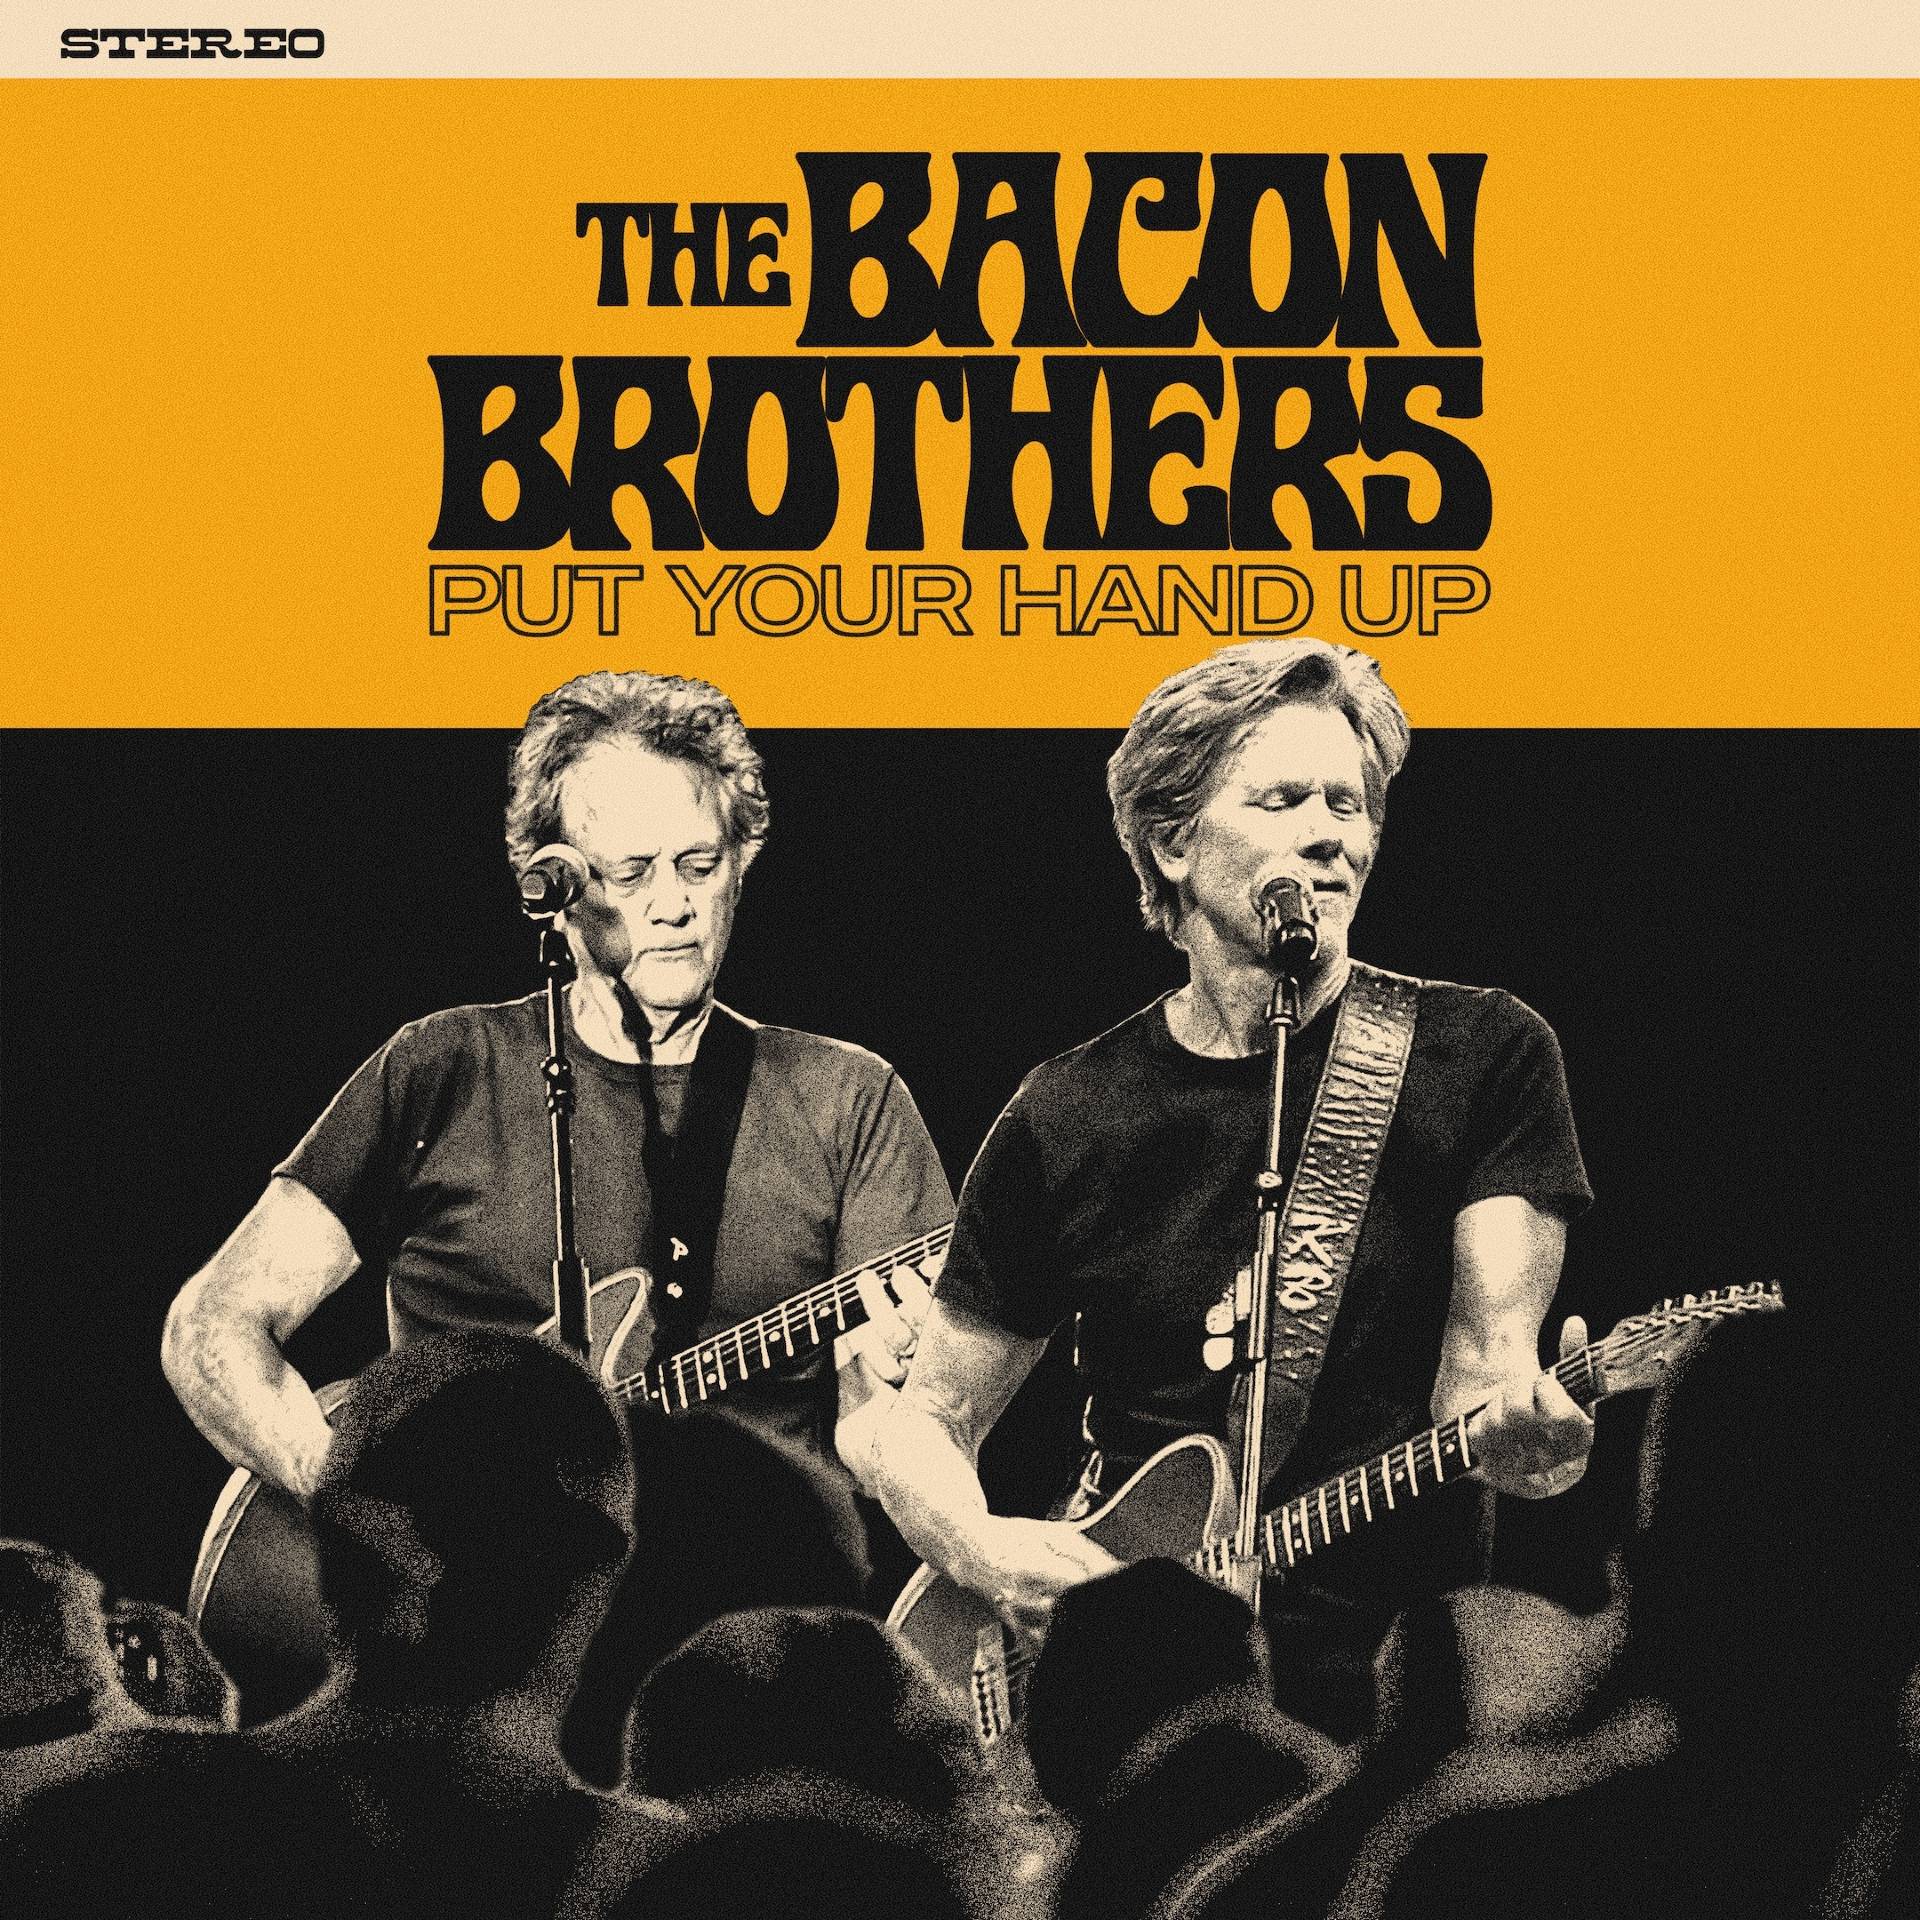 The Bacon Brothers “Put Your Hand Up” single artwork